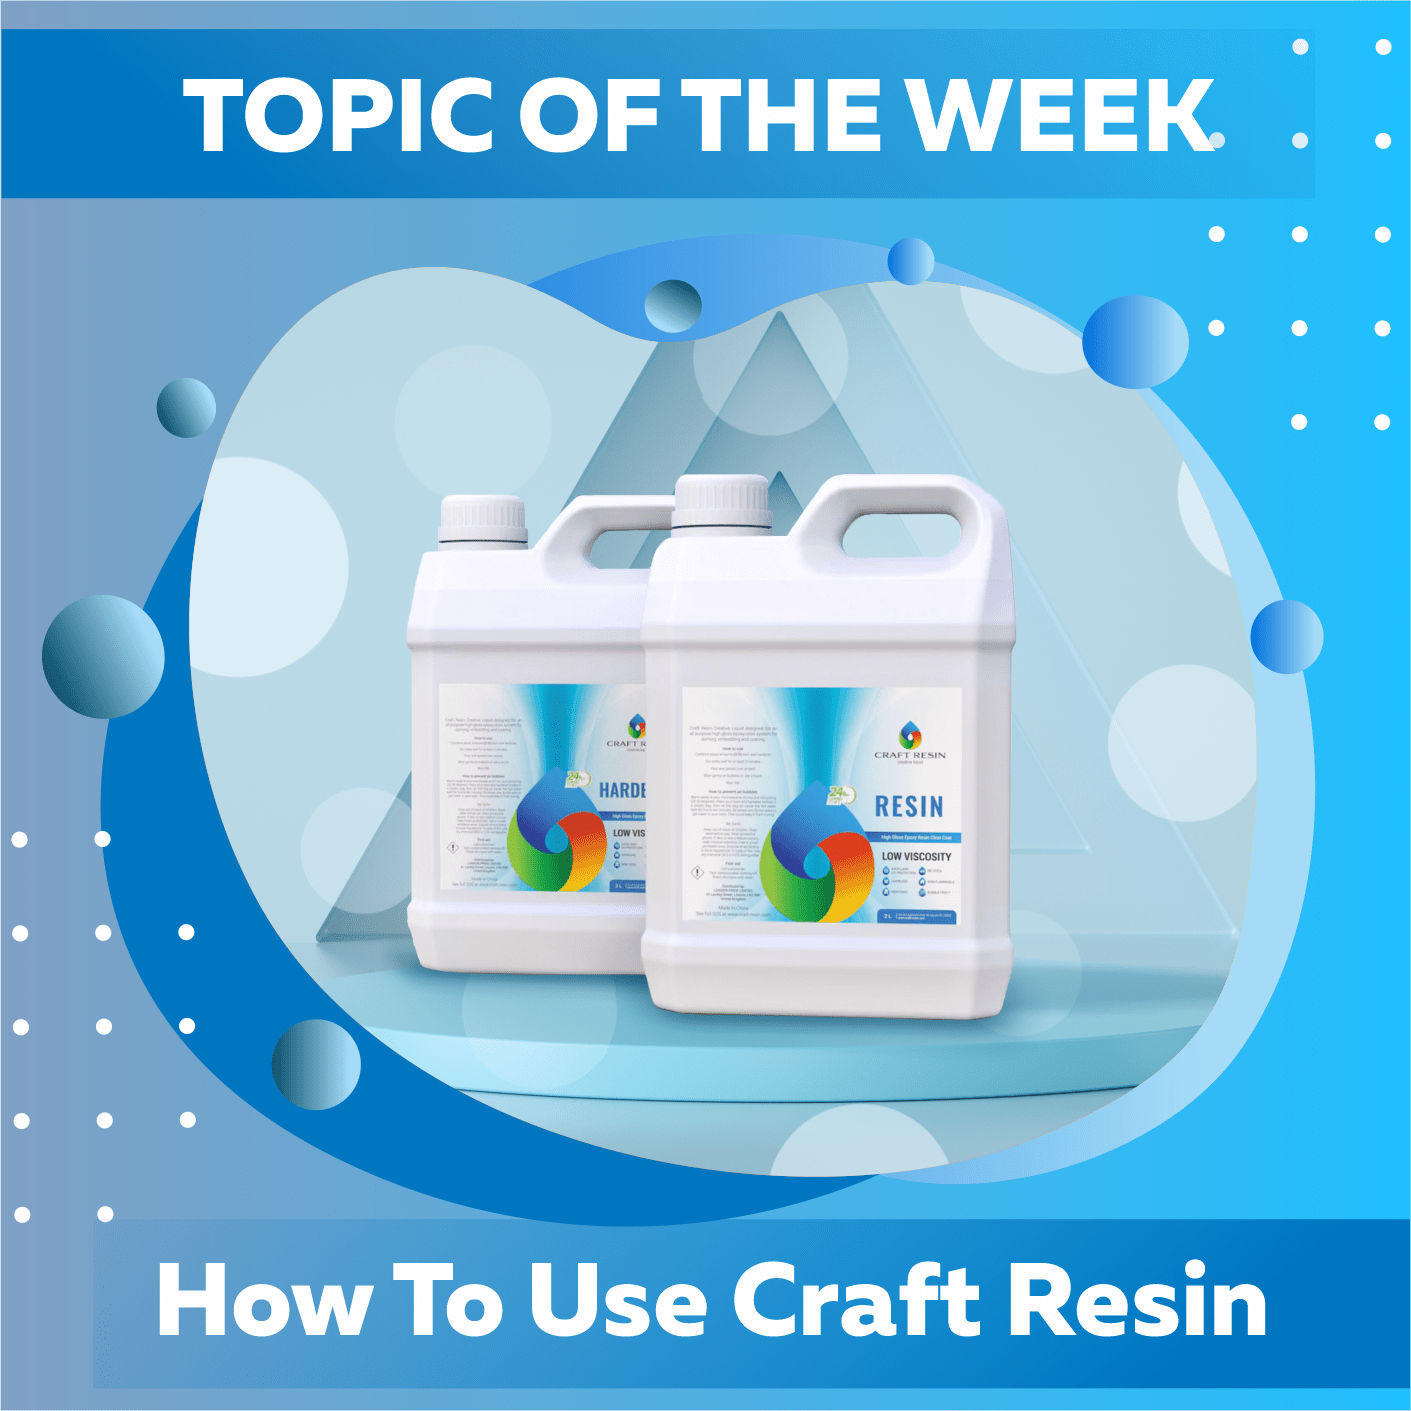 How To Use Craft Resin's Epoxy Resin